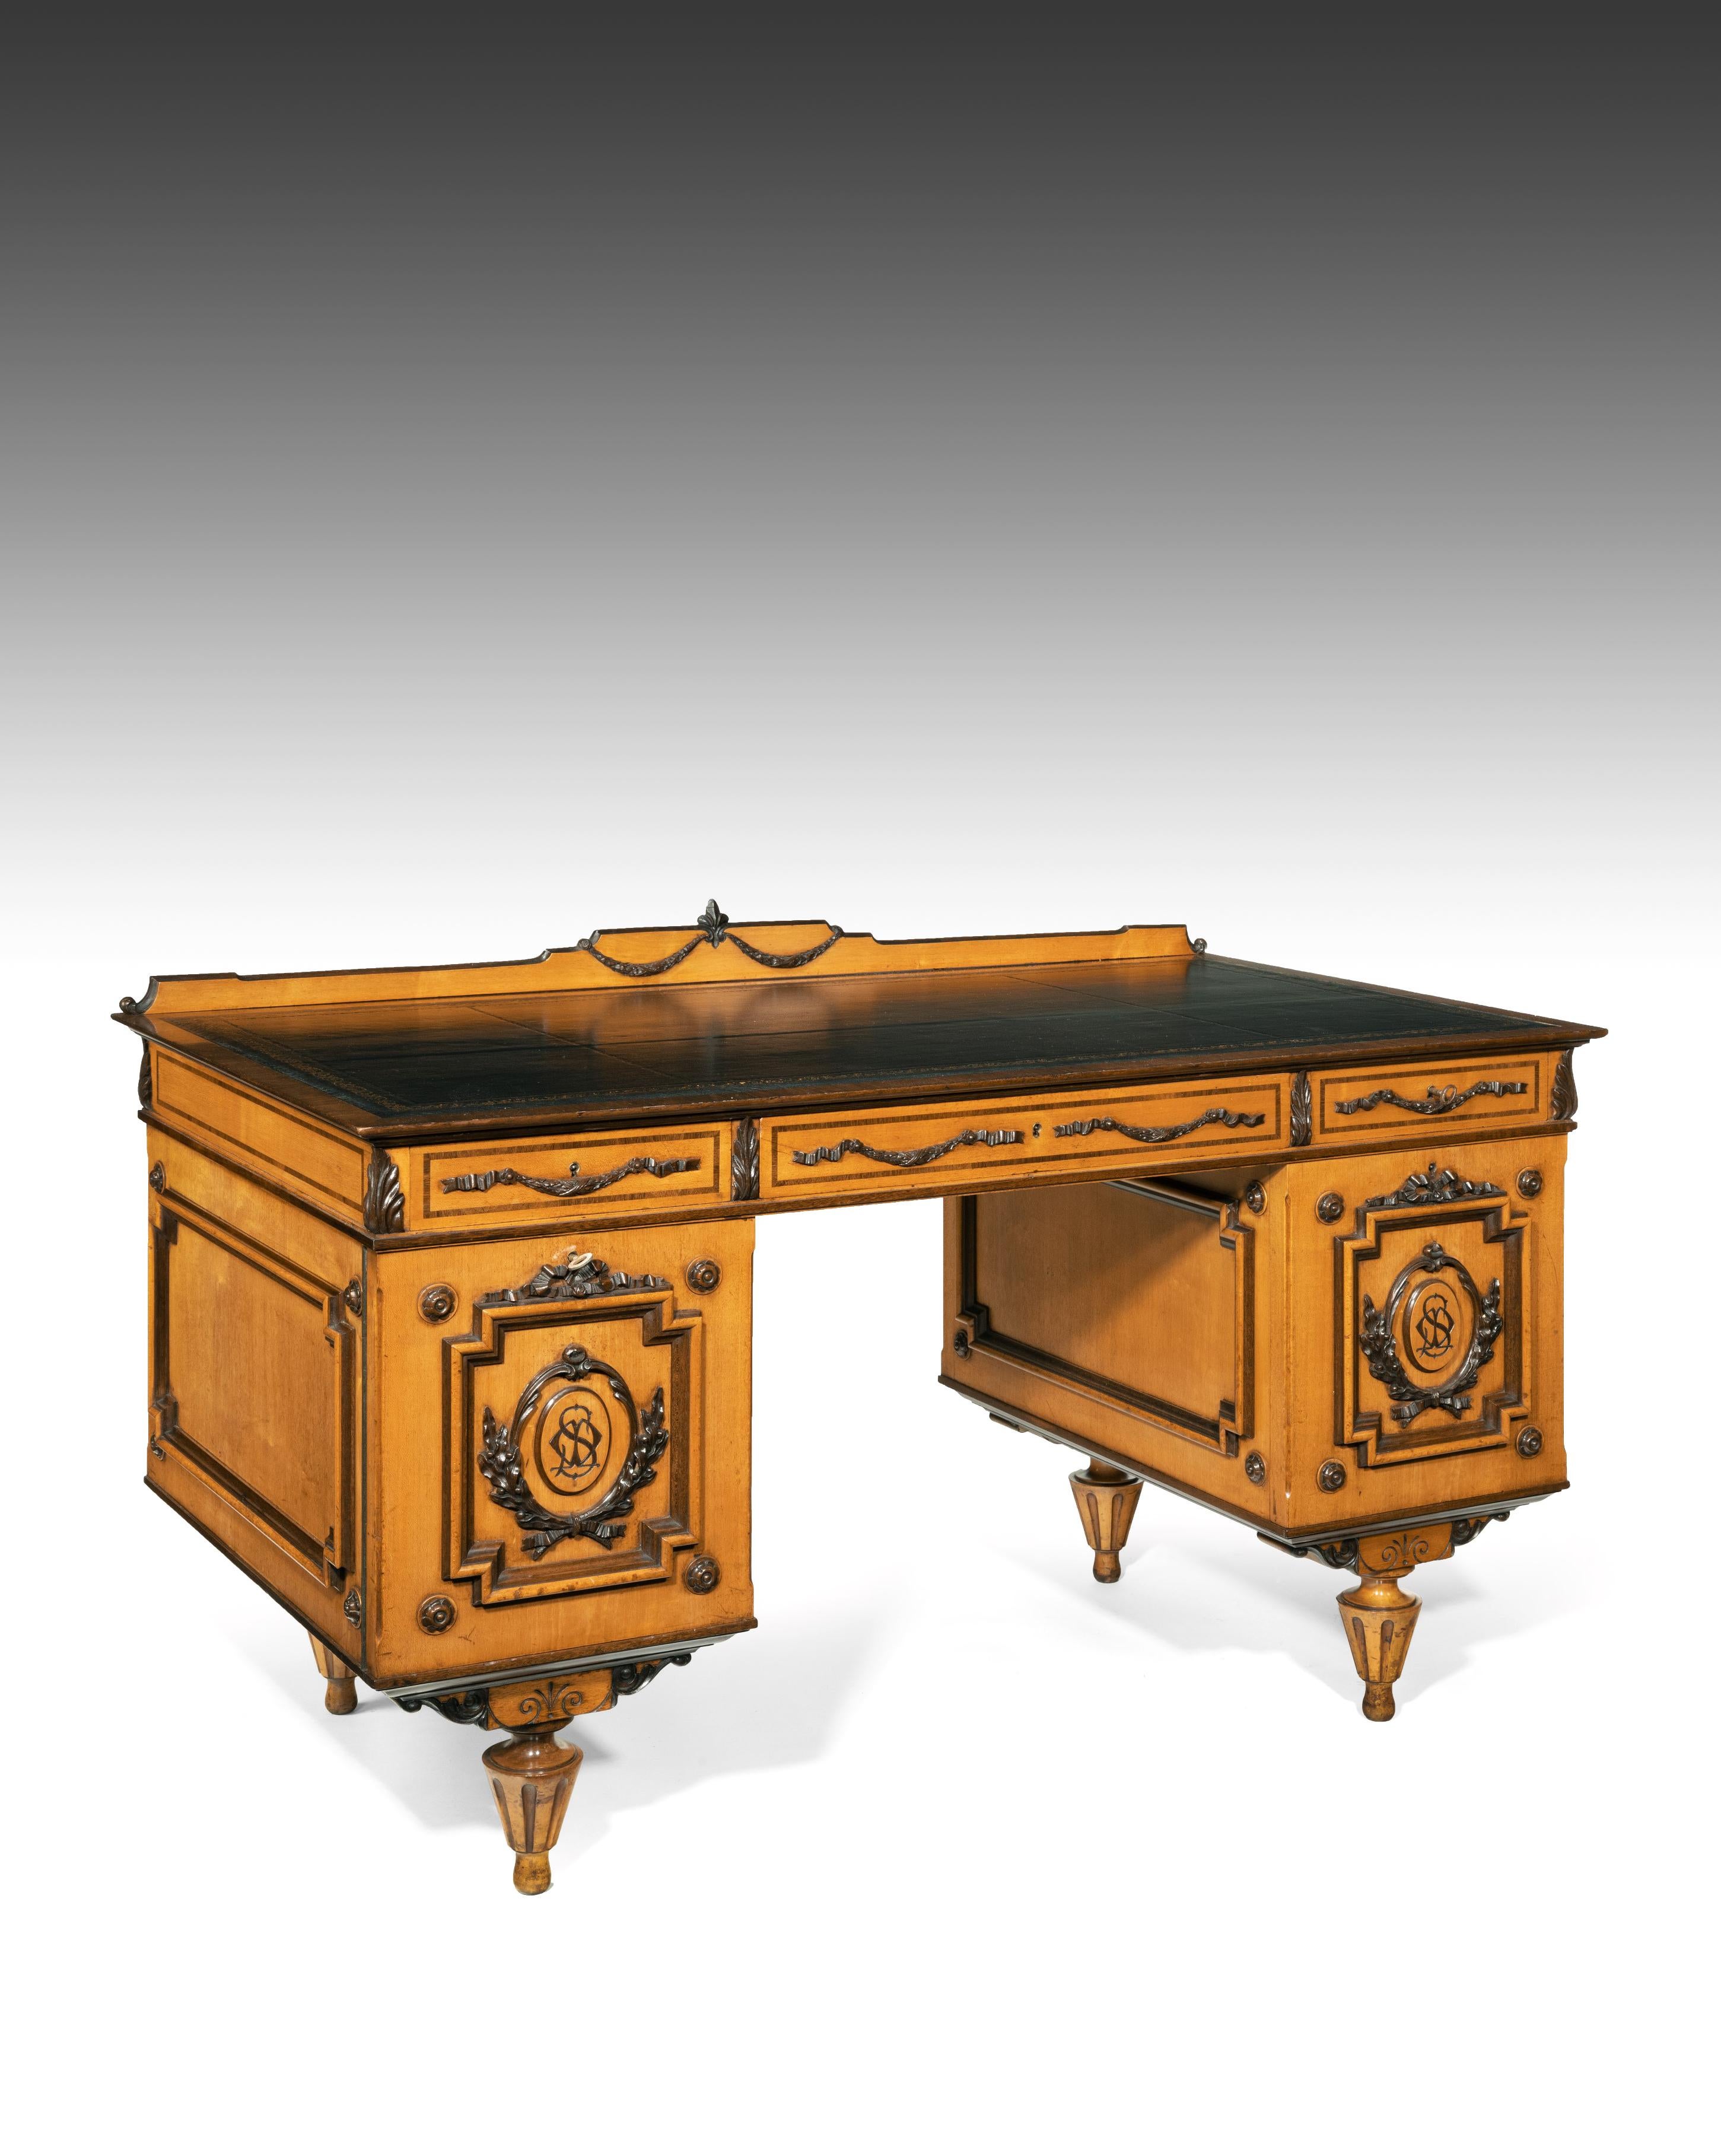 A fine 19th century Austrian satin sycamore and purple-heart wood (Amaranth) writing desk undoubtedly from Vienna.

Austrian, Vienna, circa 1850-1860.

Decorated all over with purple-heart wood / neo-classical finely carved mouldings and